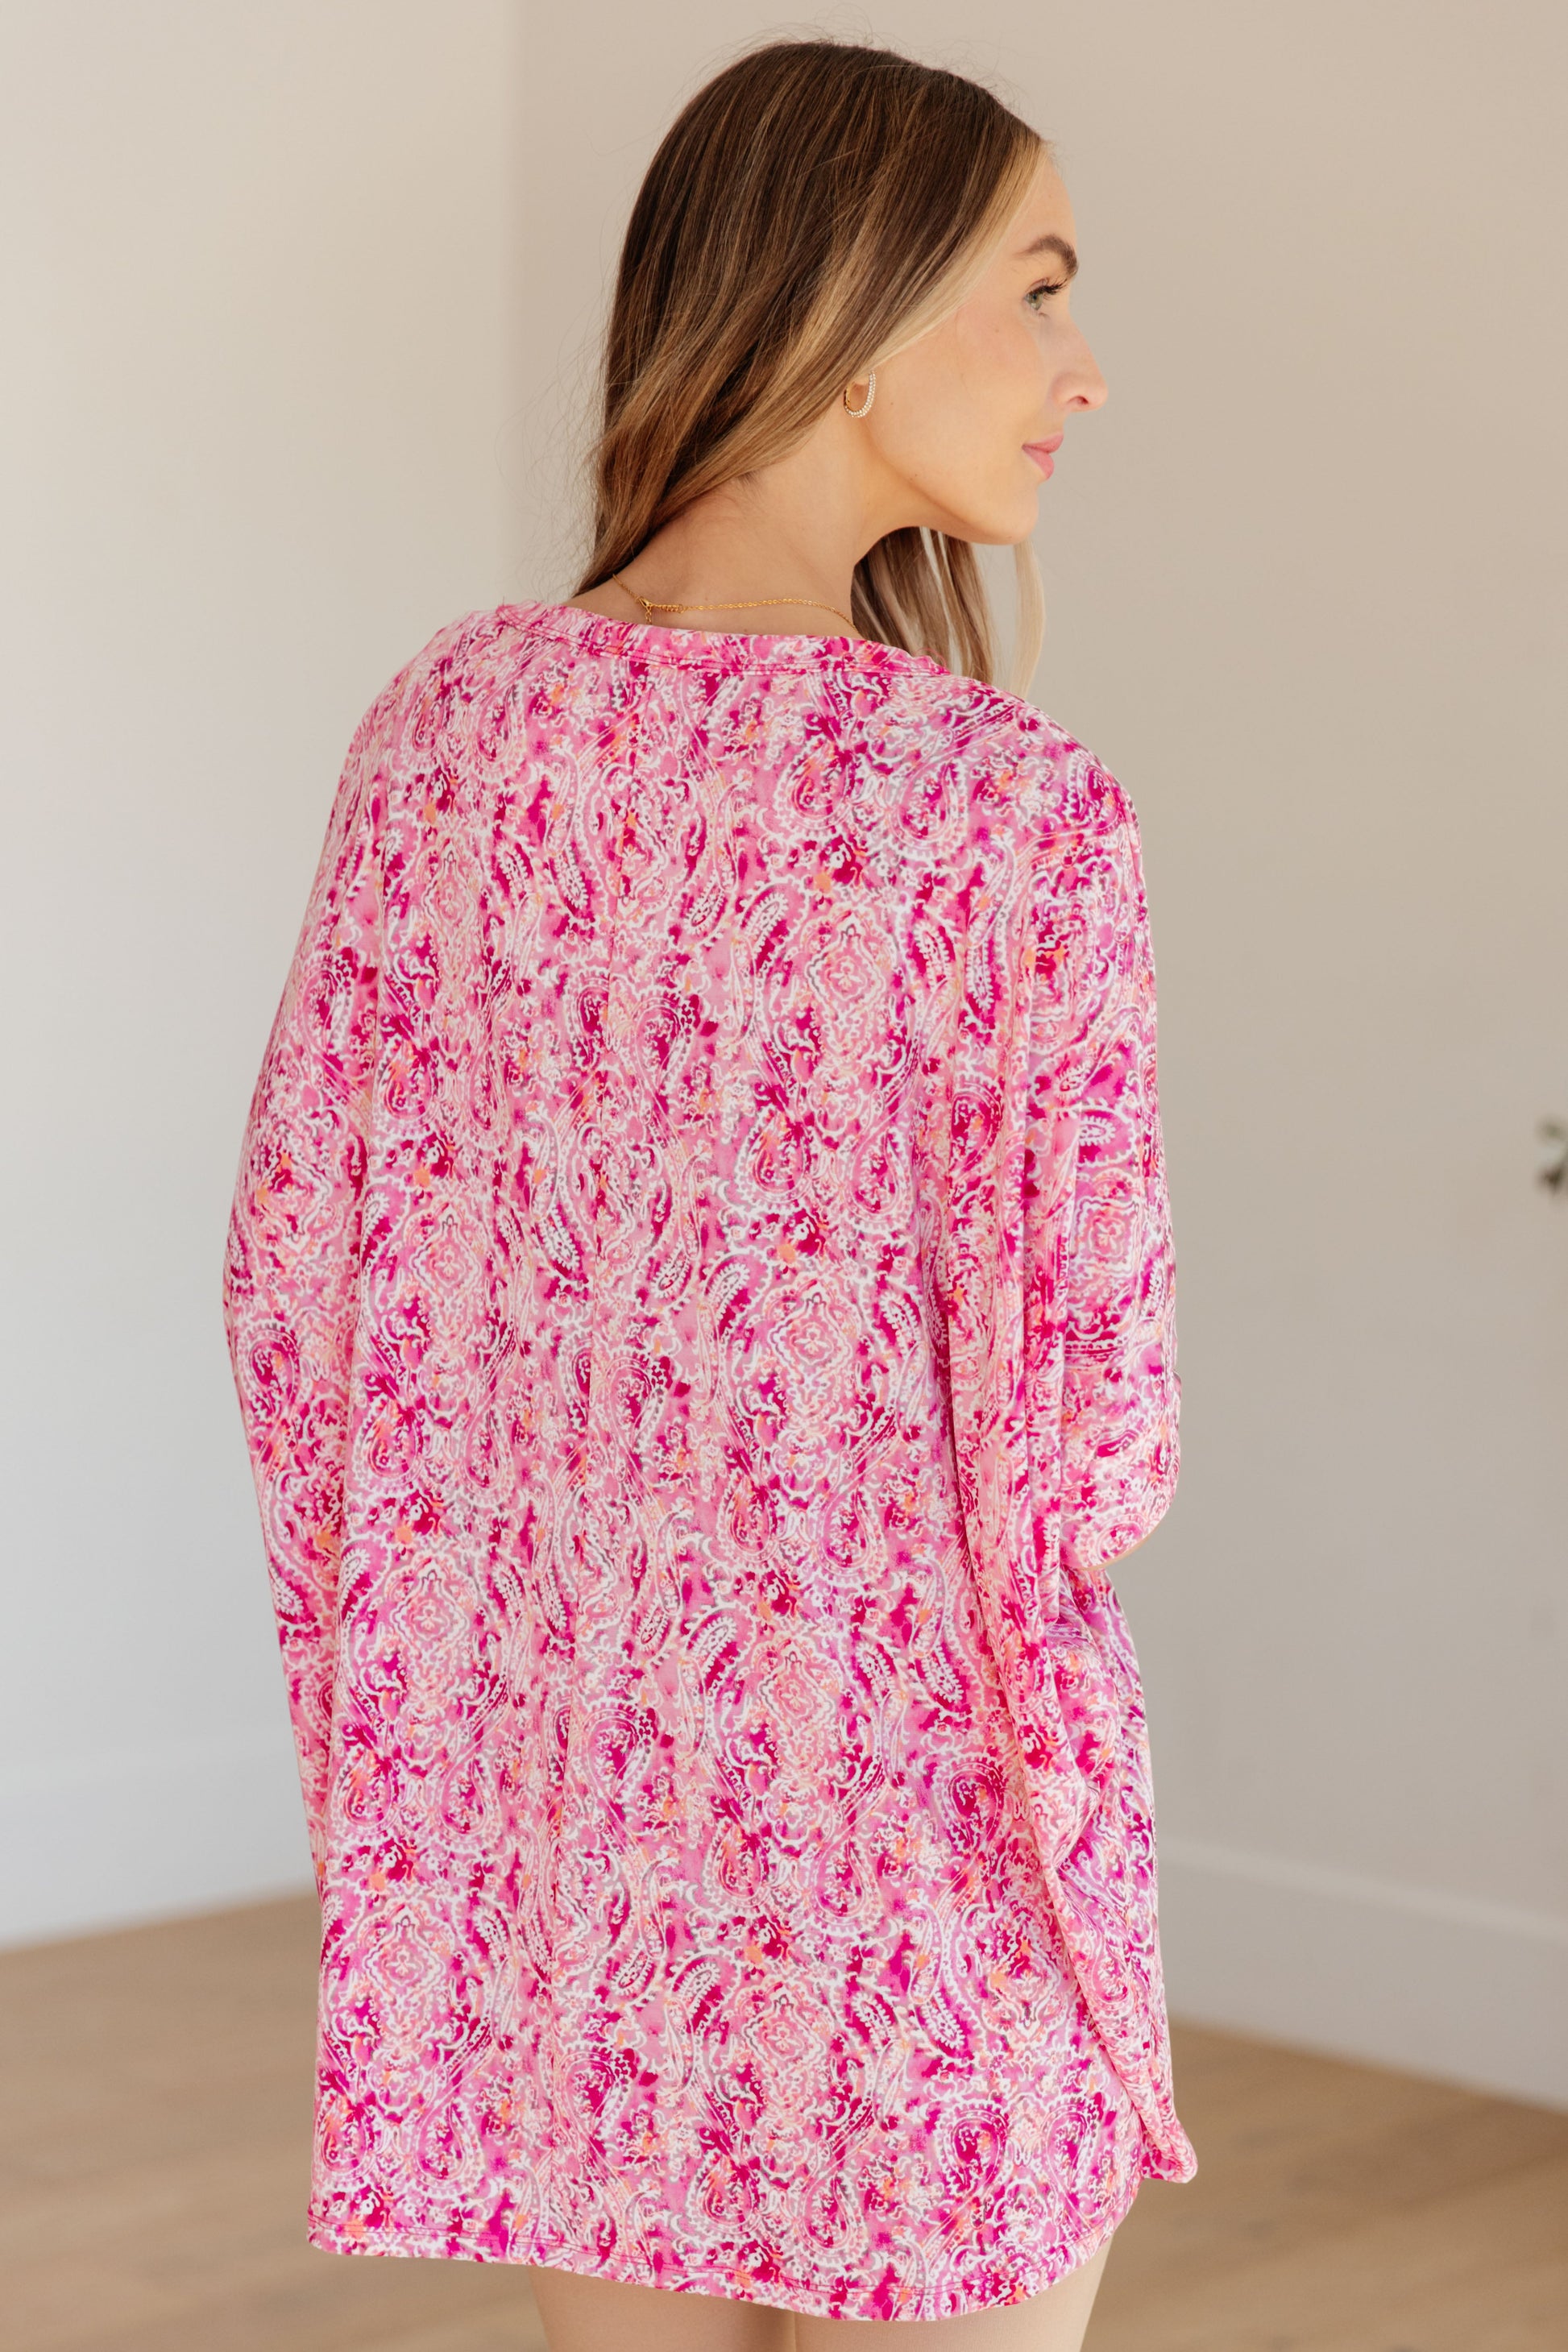 Essential Blouse in Fuchsia and White Paisley Ave Shops